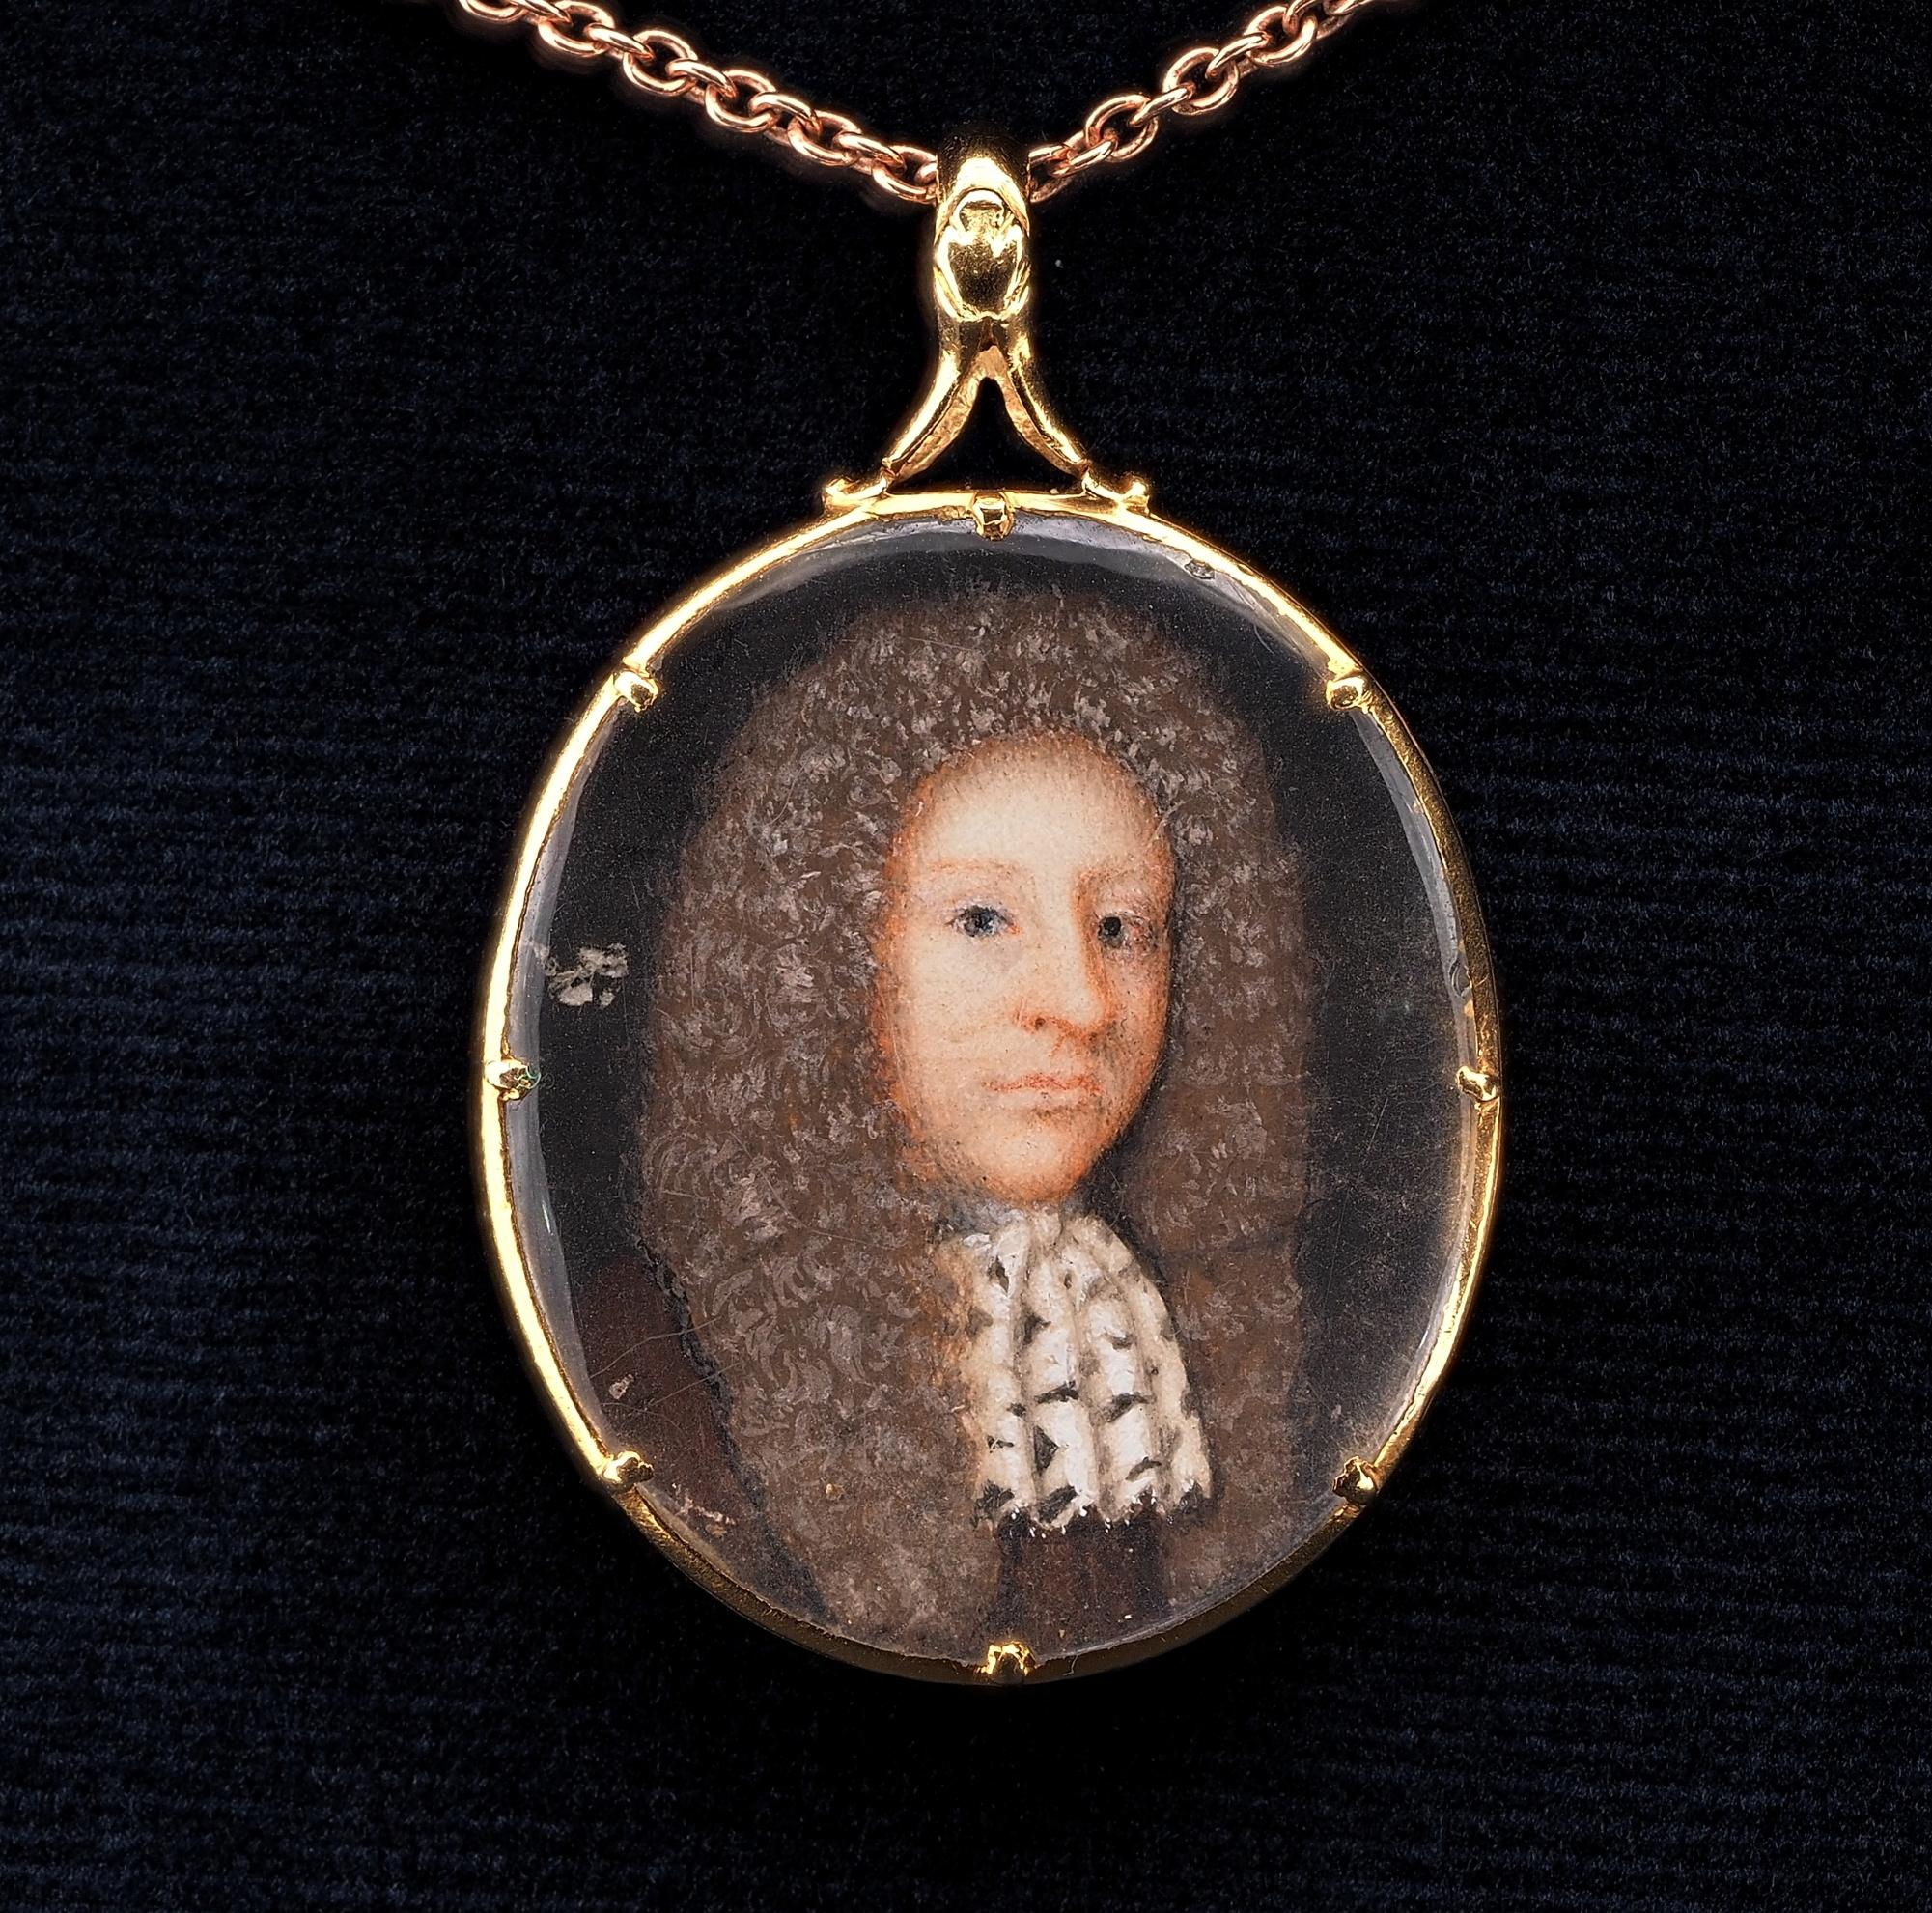 Journey to the Past
This intriguing gentleman portrait miniature is mid to end of 17th century, 1670 ca
Skilfully painted featuring a gentleman with curly hair and lace jabot, miniature sealed under quartz with moss agate back, mounted in solid 18